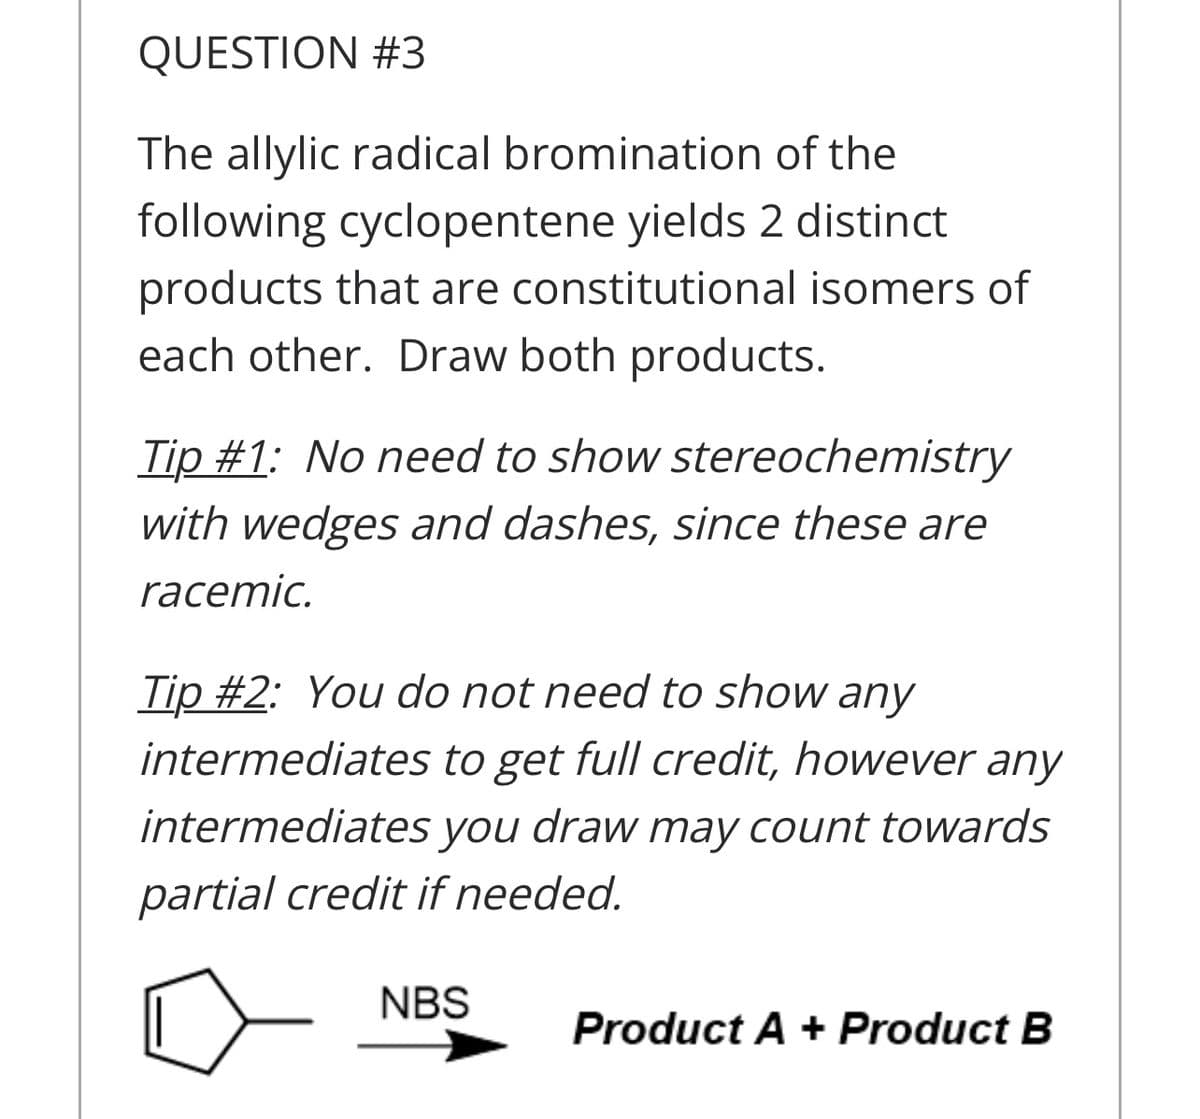 QUESTION #3
The allylic radical bromination of the
following cyclopentene yields 2 distinct
products that are constitutional isomers of
each other. Draw both products.
Tip #1: No need to show stereochemistry
with wedges and dashes, since these are
racemic.
Tip #2: You do not need to show any
intermediates to get full credit, however any
intermediates you draw may count towards
partial credit if needed.
NBS
Product A + Product B
